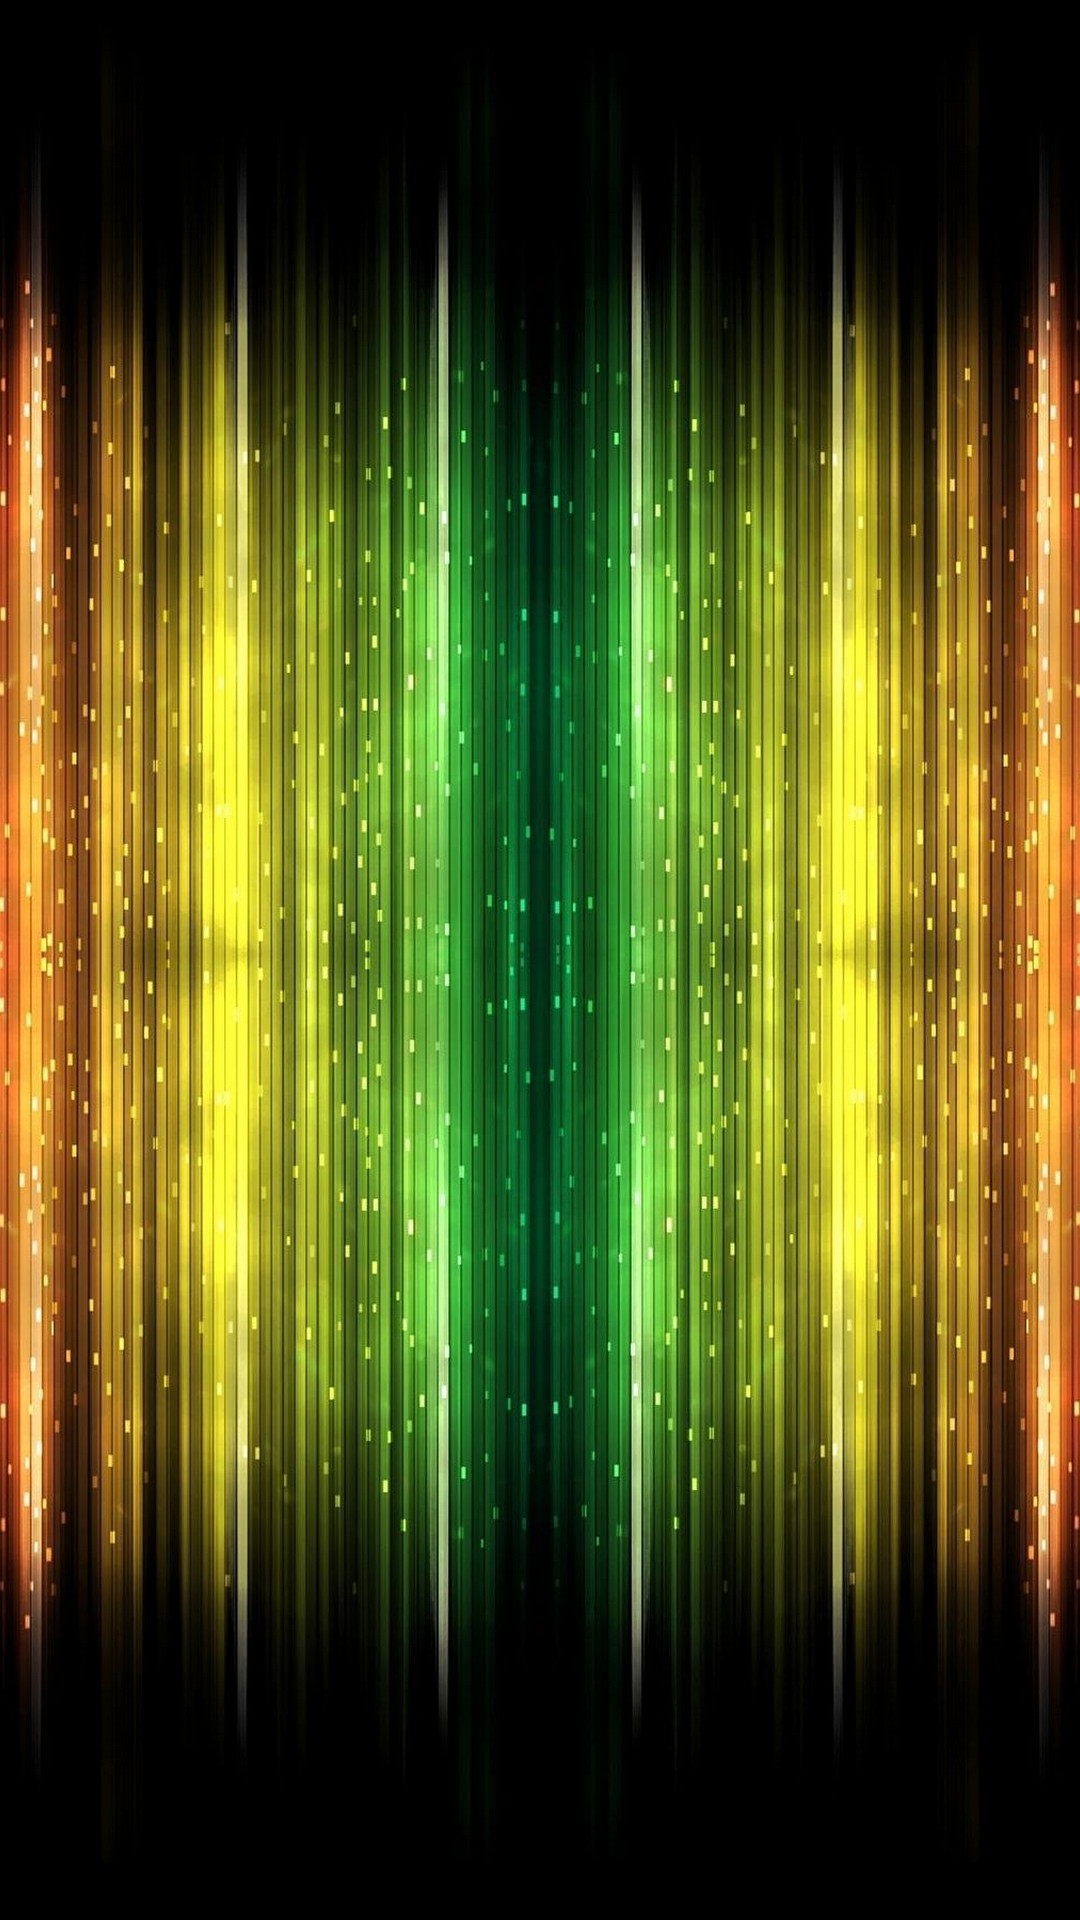 Rainbow Colors Wallpaper For iPhone with resolution 1080X1920 pixel. You can make this wallpaper for your iPhone 5, 6, 7, 8, X backgrounds, Mobile Screensaver, or iPad Lock Screen